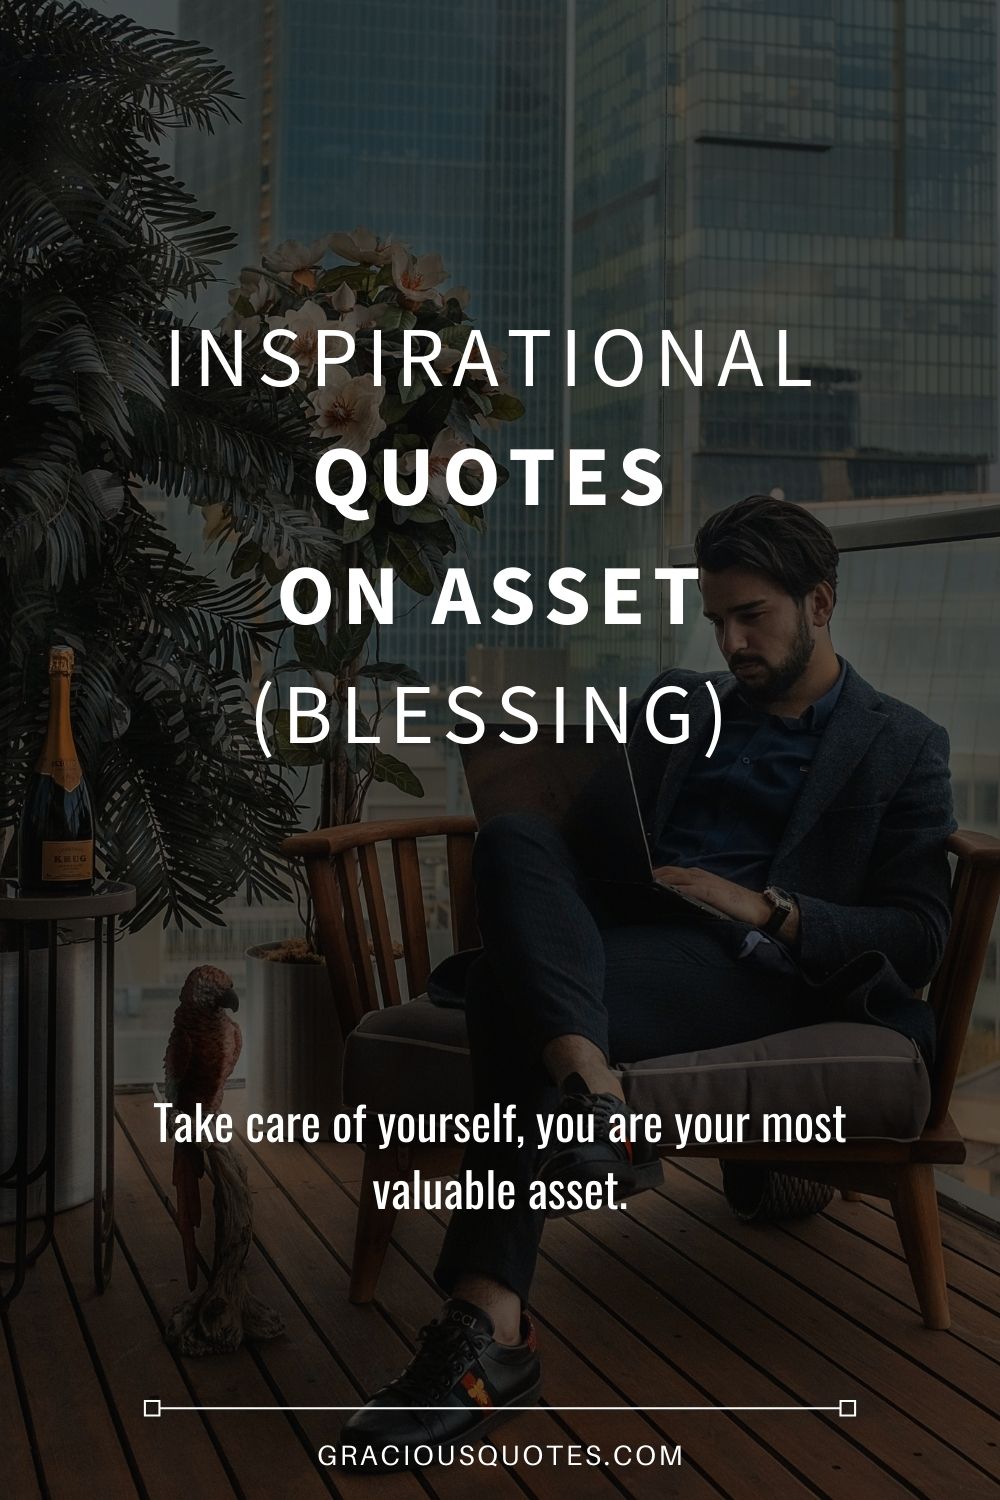 Inspirational Quotes on Asset (BLESSING) - Gracious Quotes